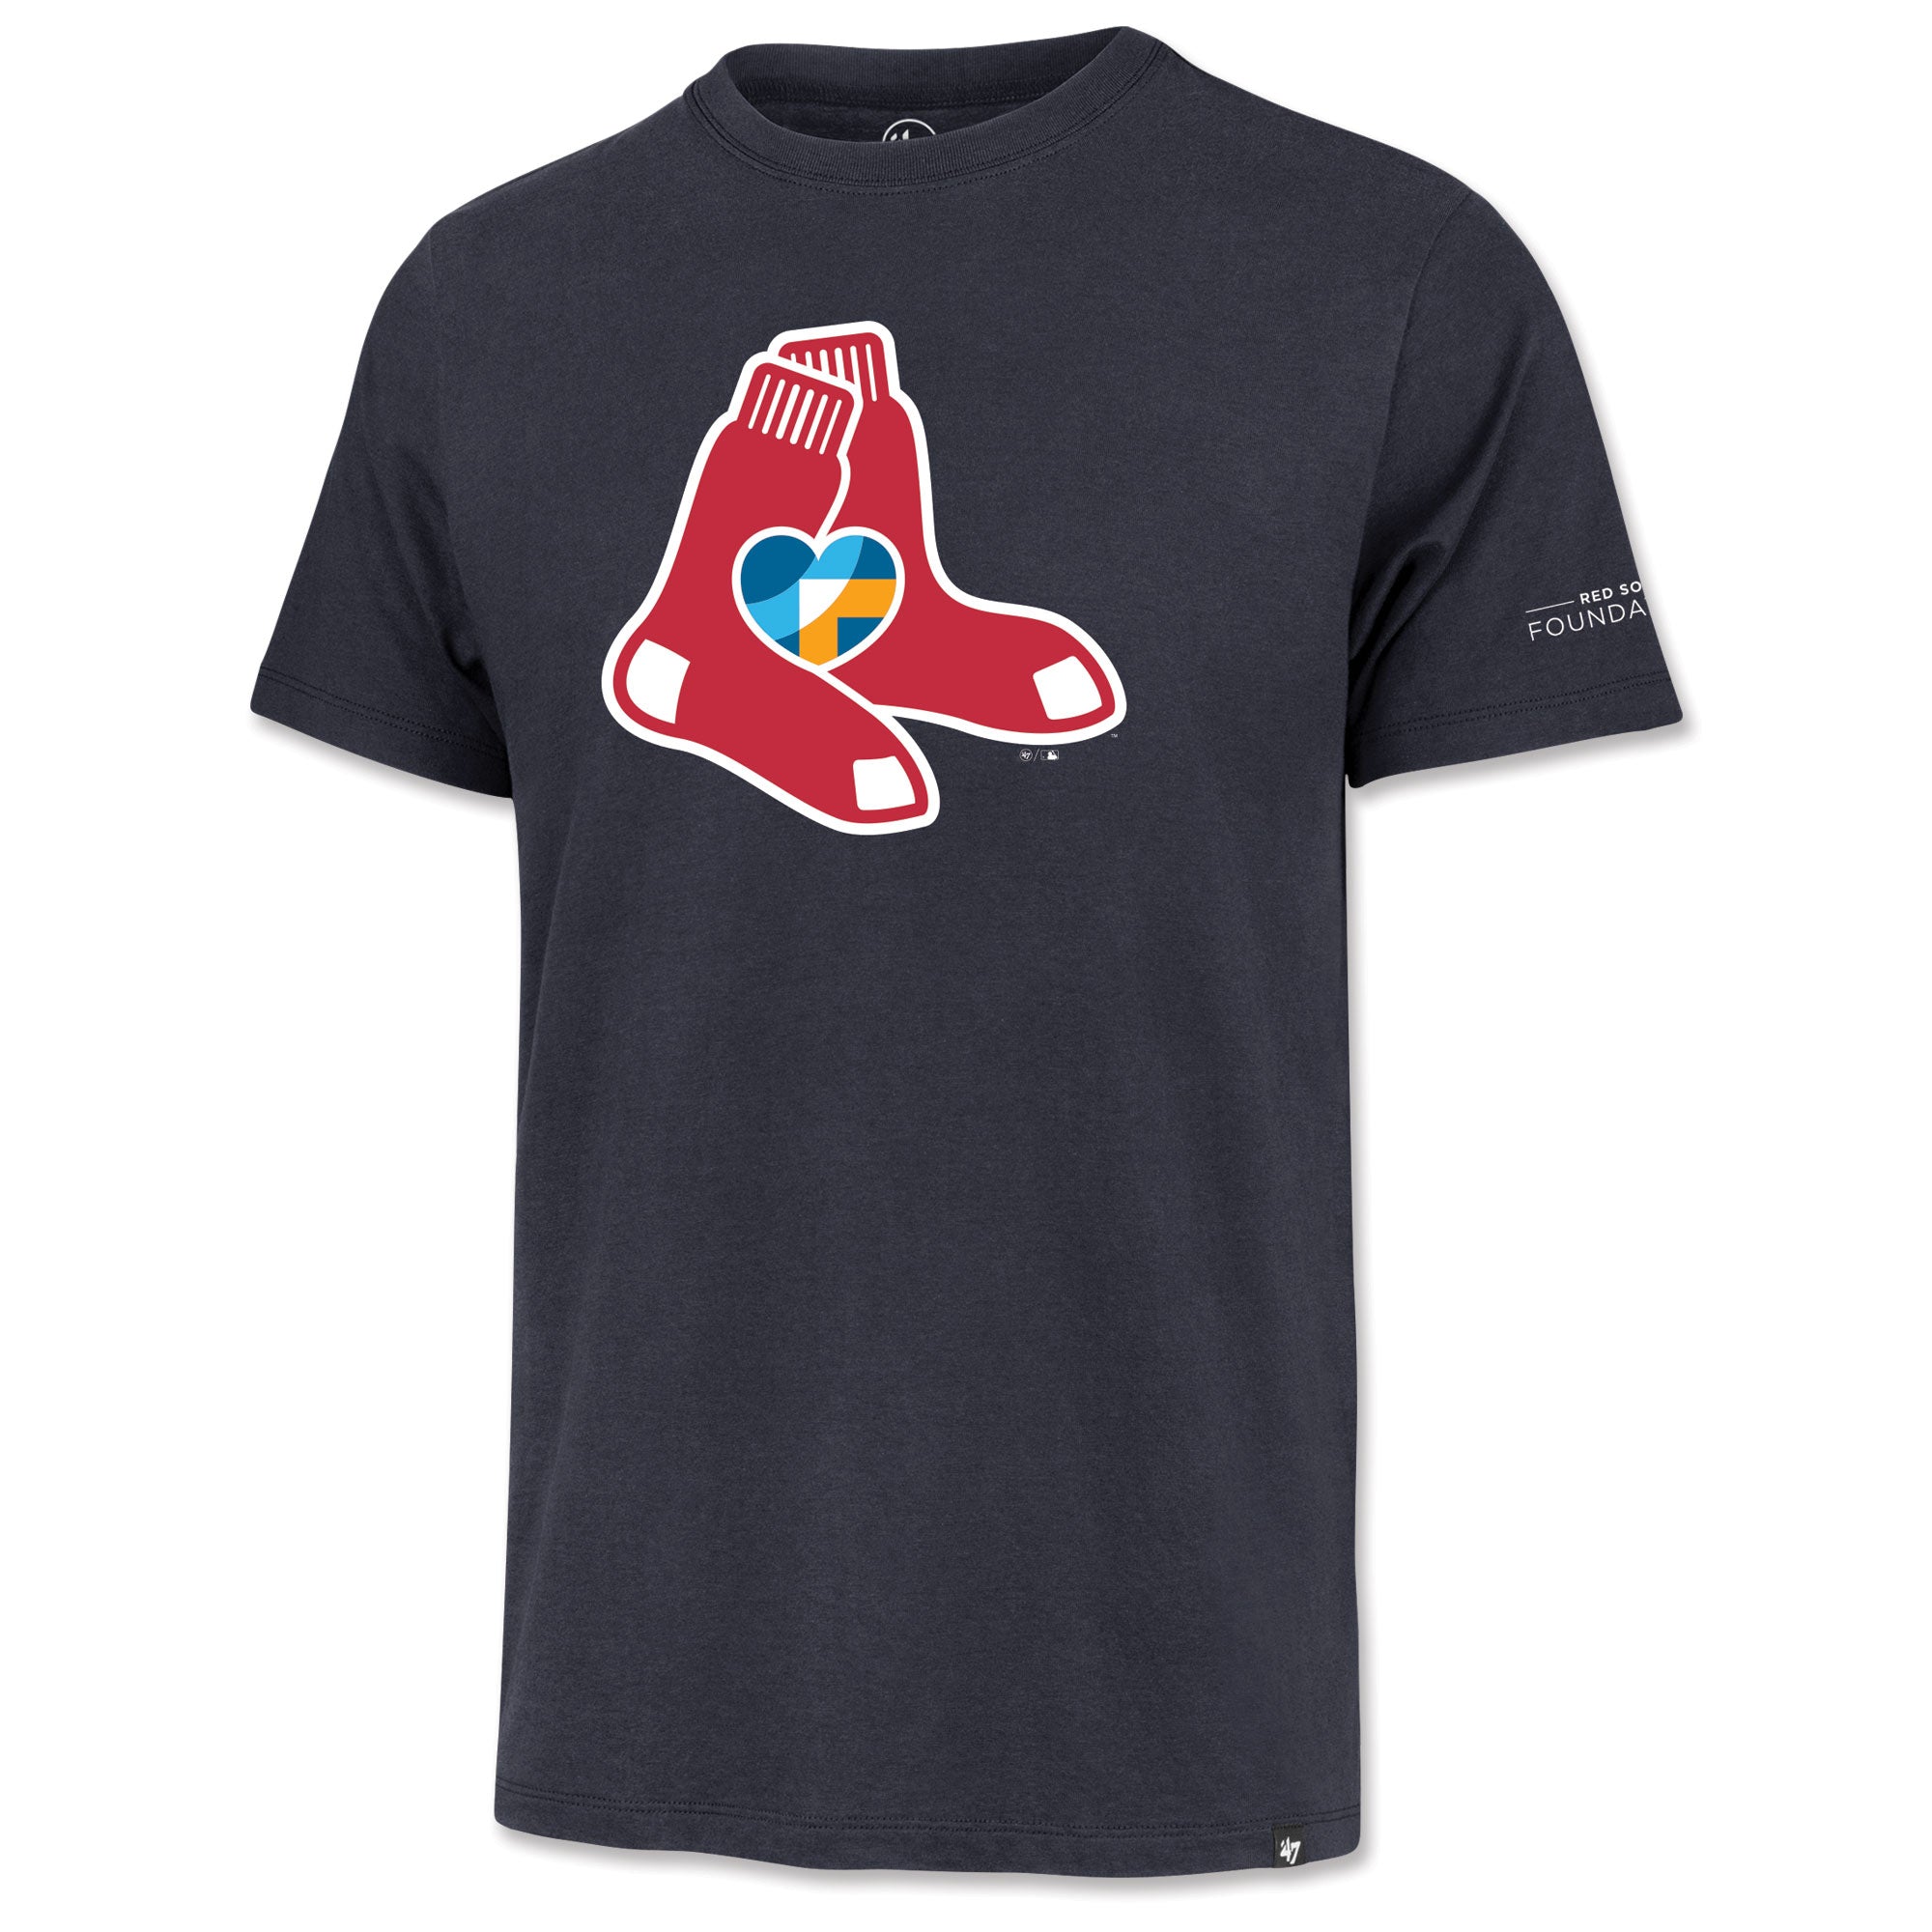 Red Sox Nation T-Shirts for Sale